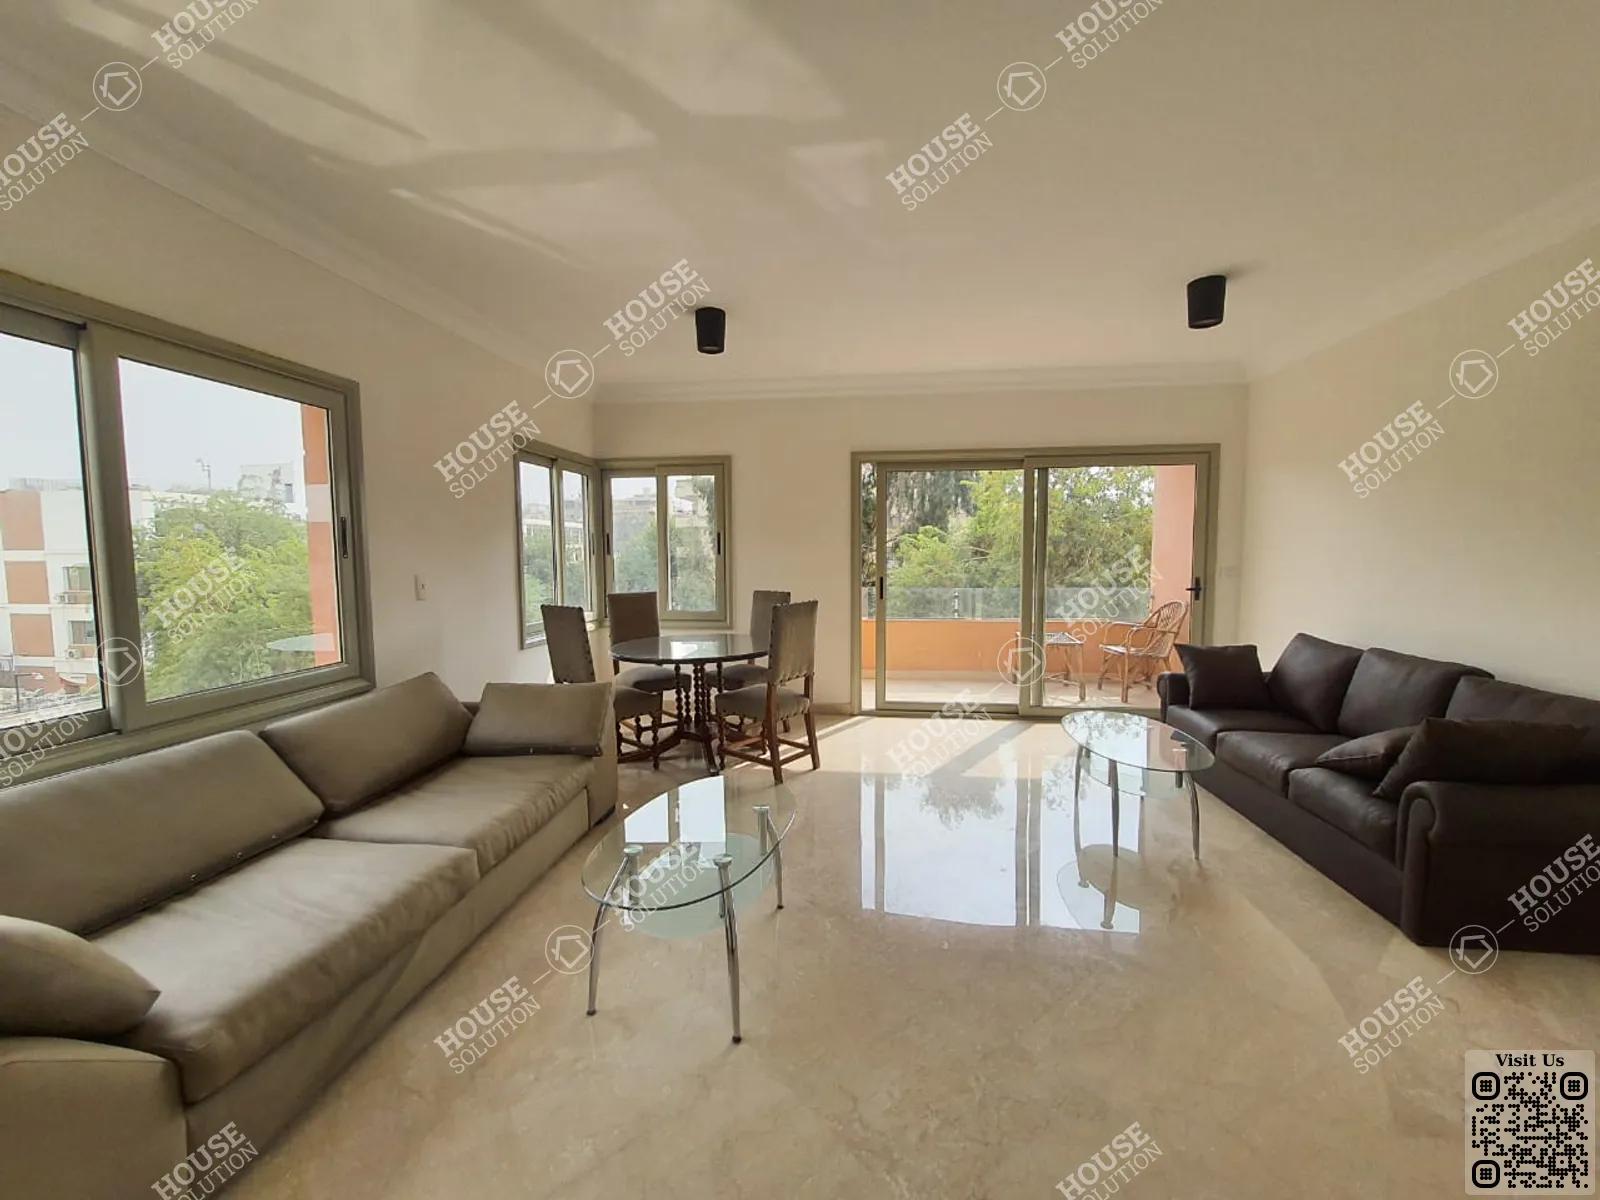 RECEPTION  @ Apartments For Rent In Maadi Maadi Degla Area: 150 m² consists of 2 Bedrooms 3 Bathrooms Modern furnished 5 stars #5237-0